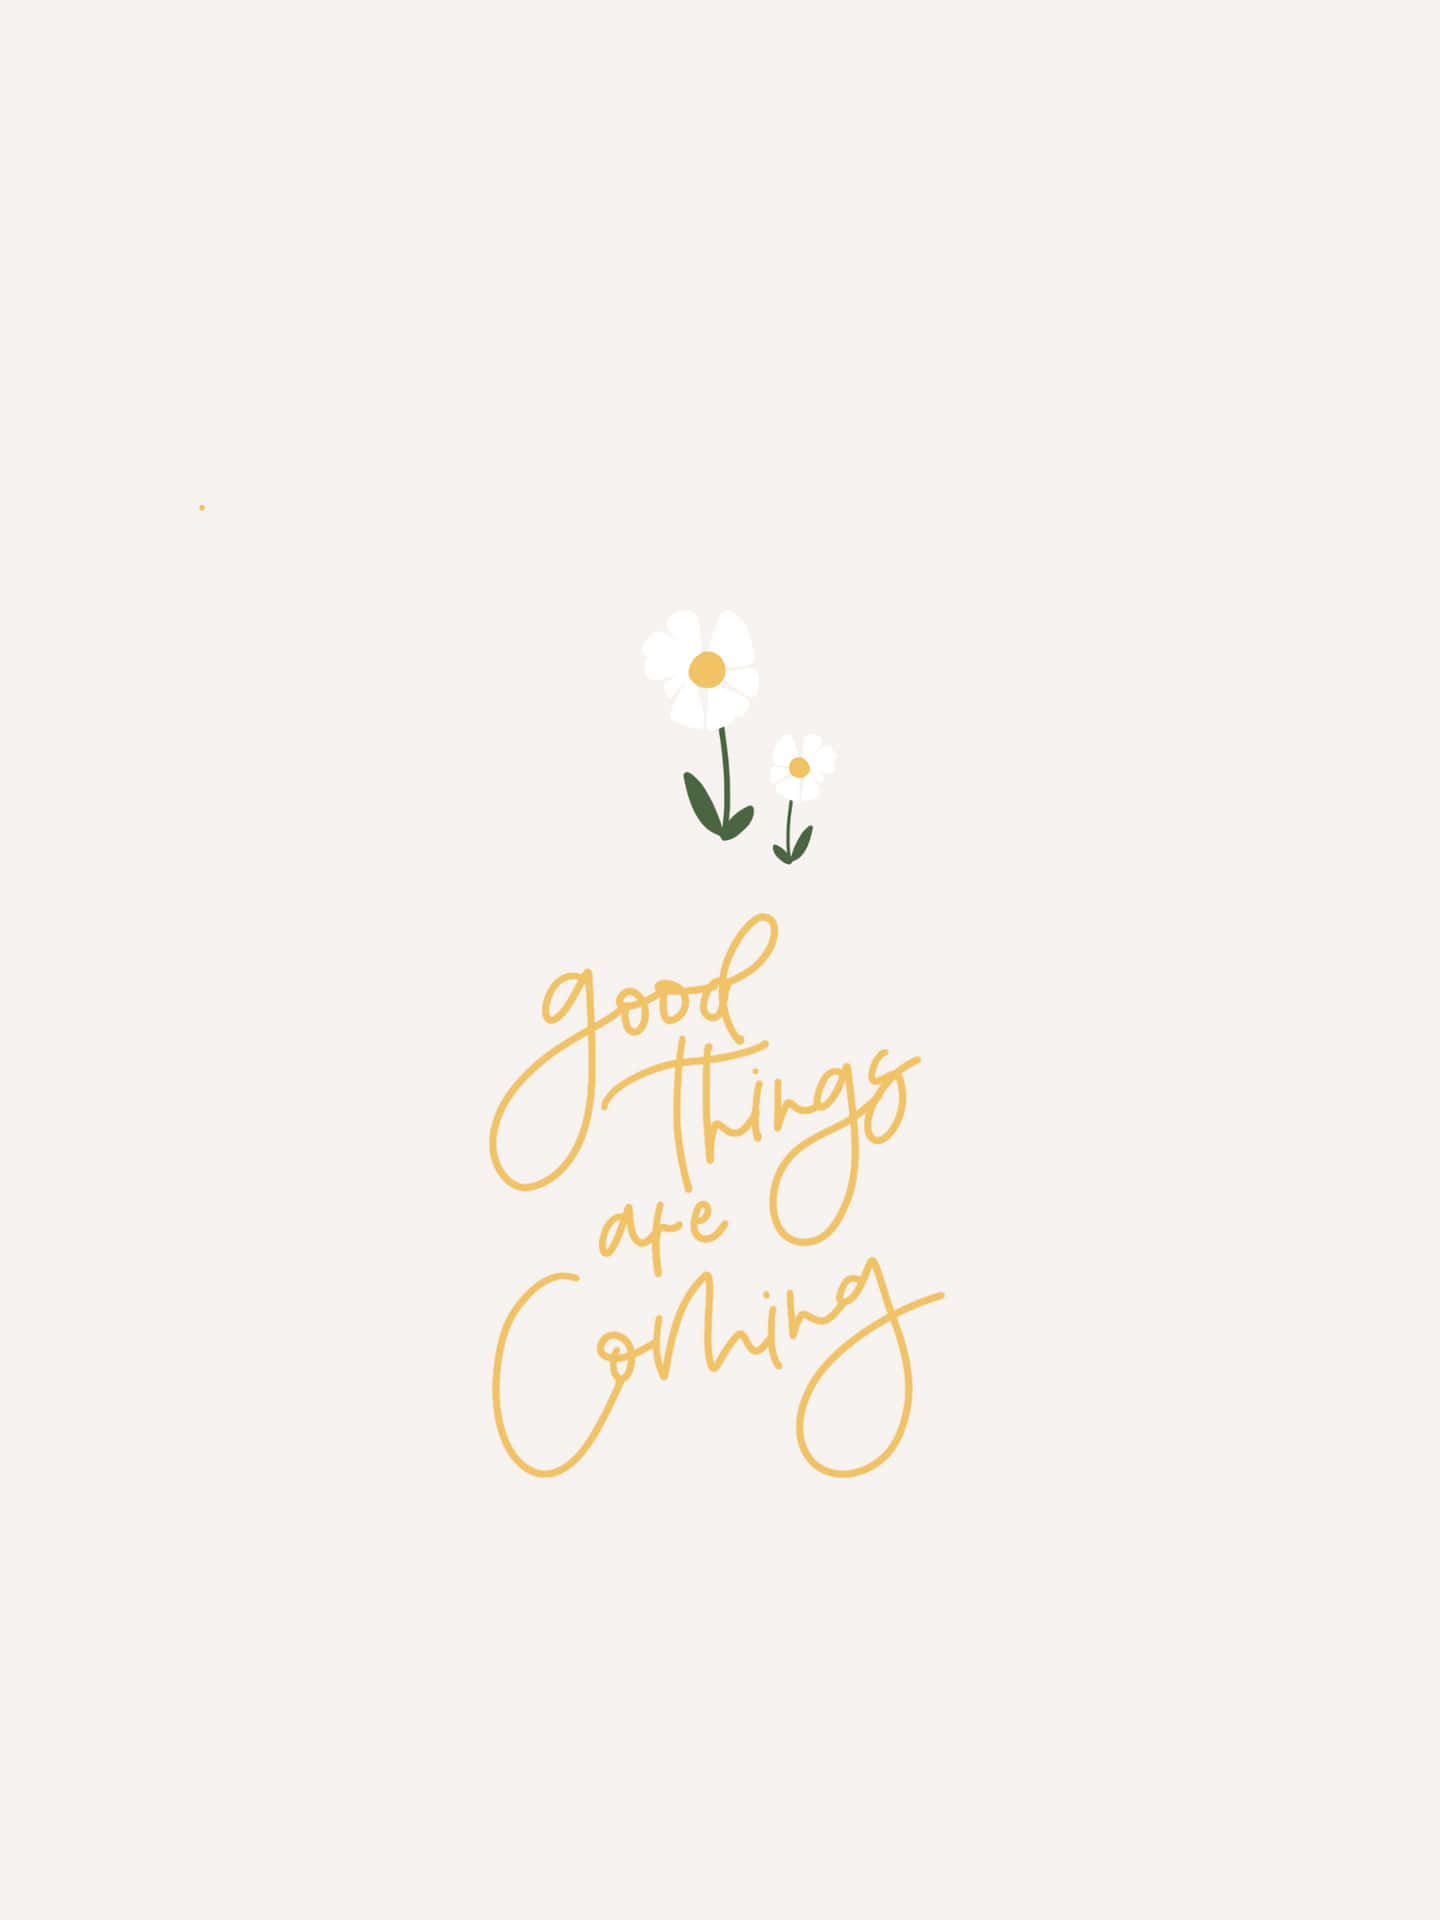 "Good Things Are Coming" Wallpaper